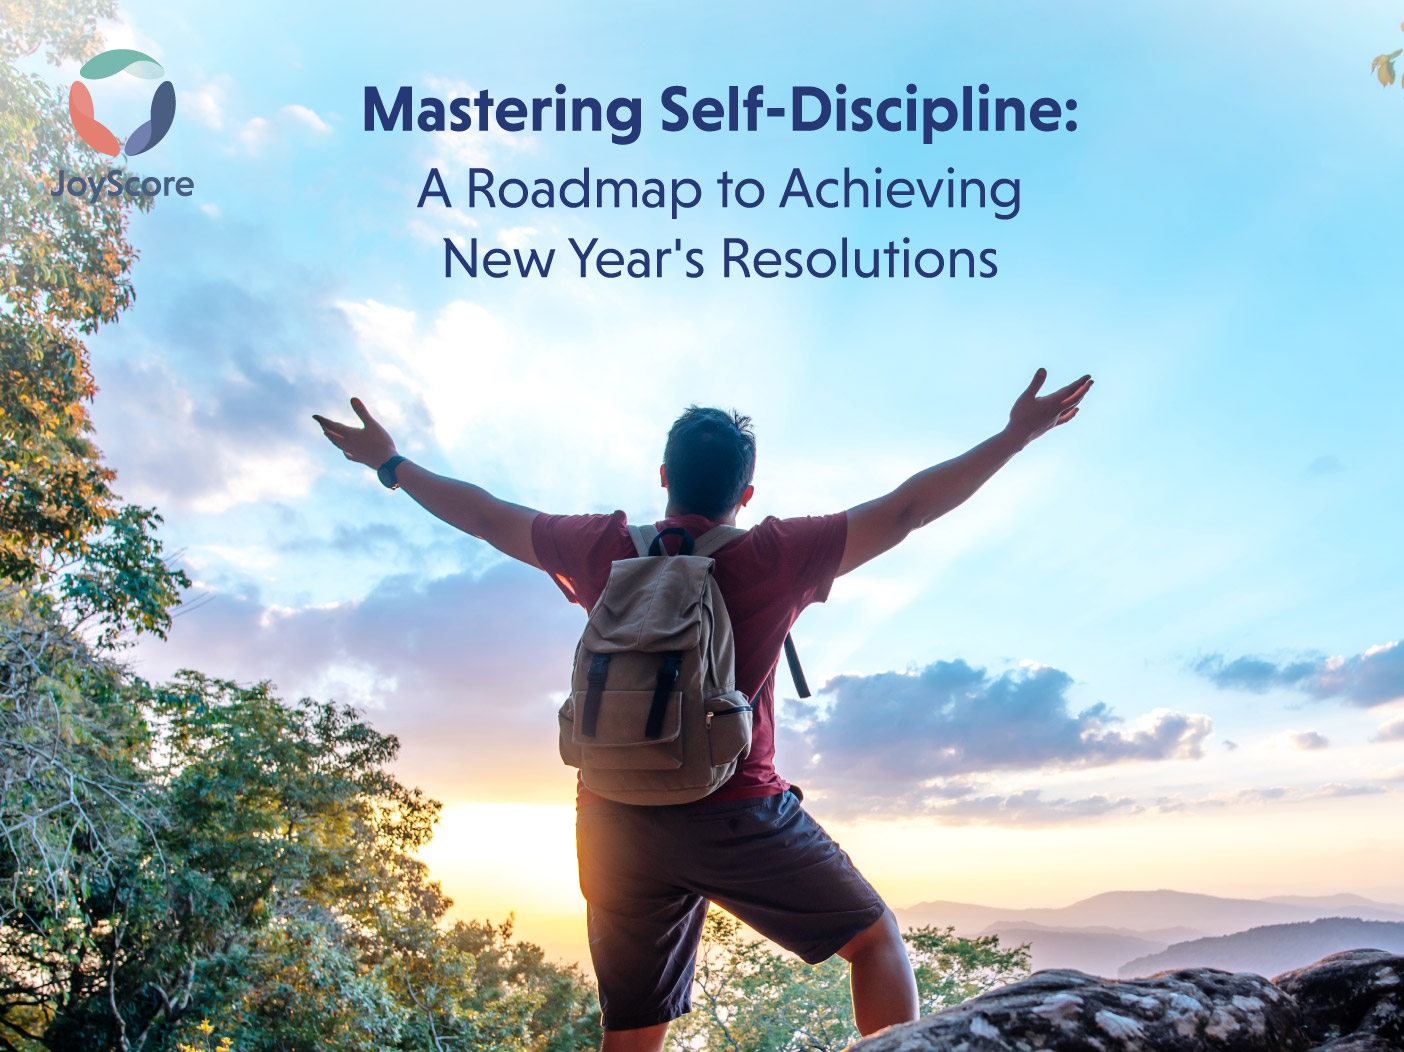 Mastering Self-Discipline: A Roadmap to Achieving New Year’s Resolutions